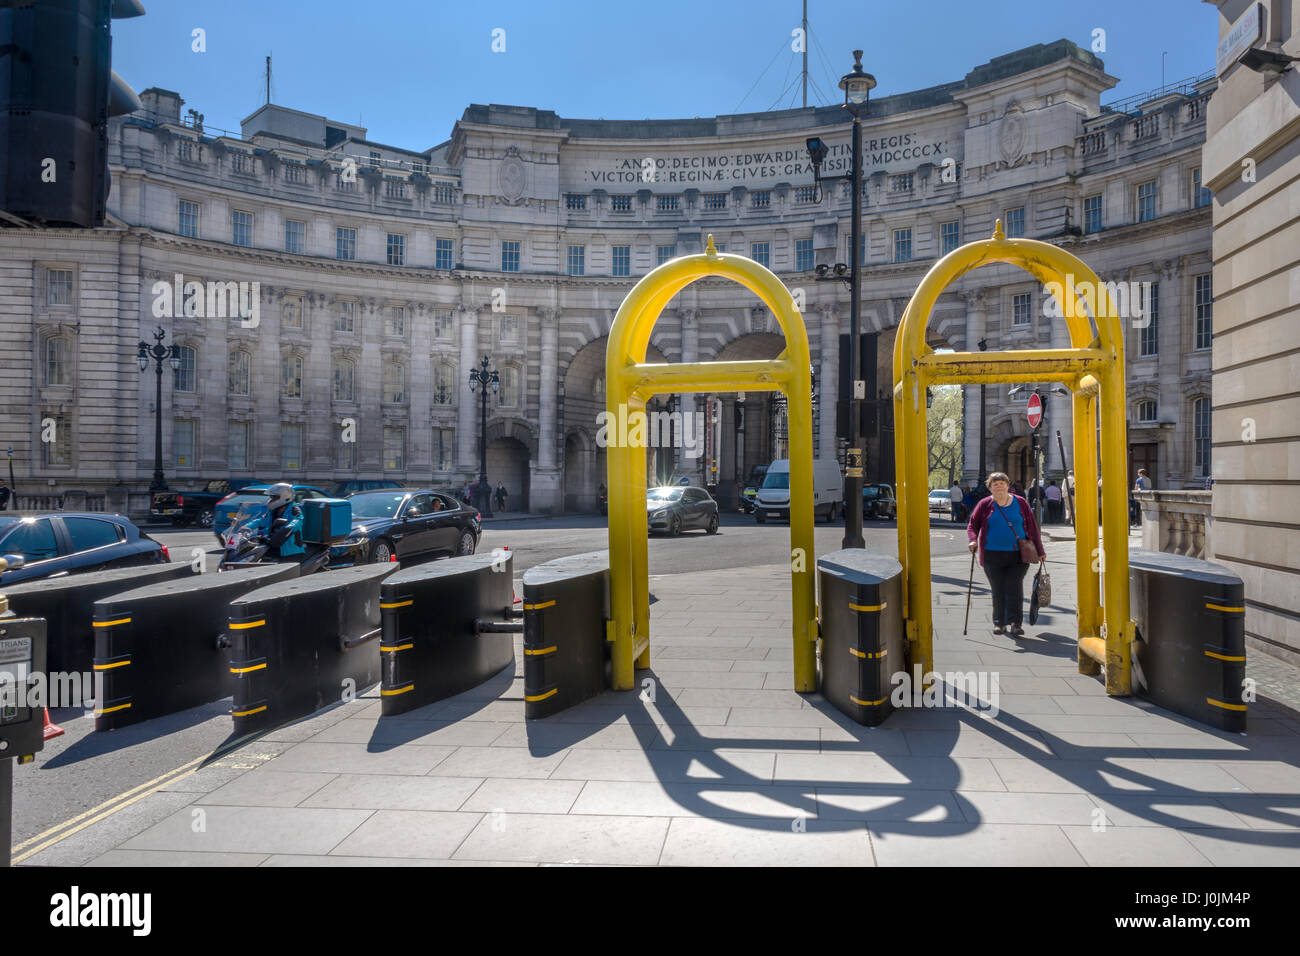 The impressive anti-terror barriers situated outside of Admiralty Arch on The Mall near Trafalgar Square in central London, England. Stock Photo